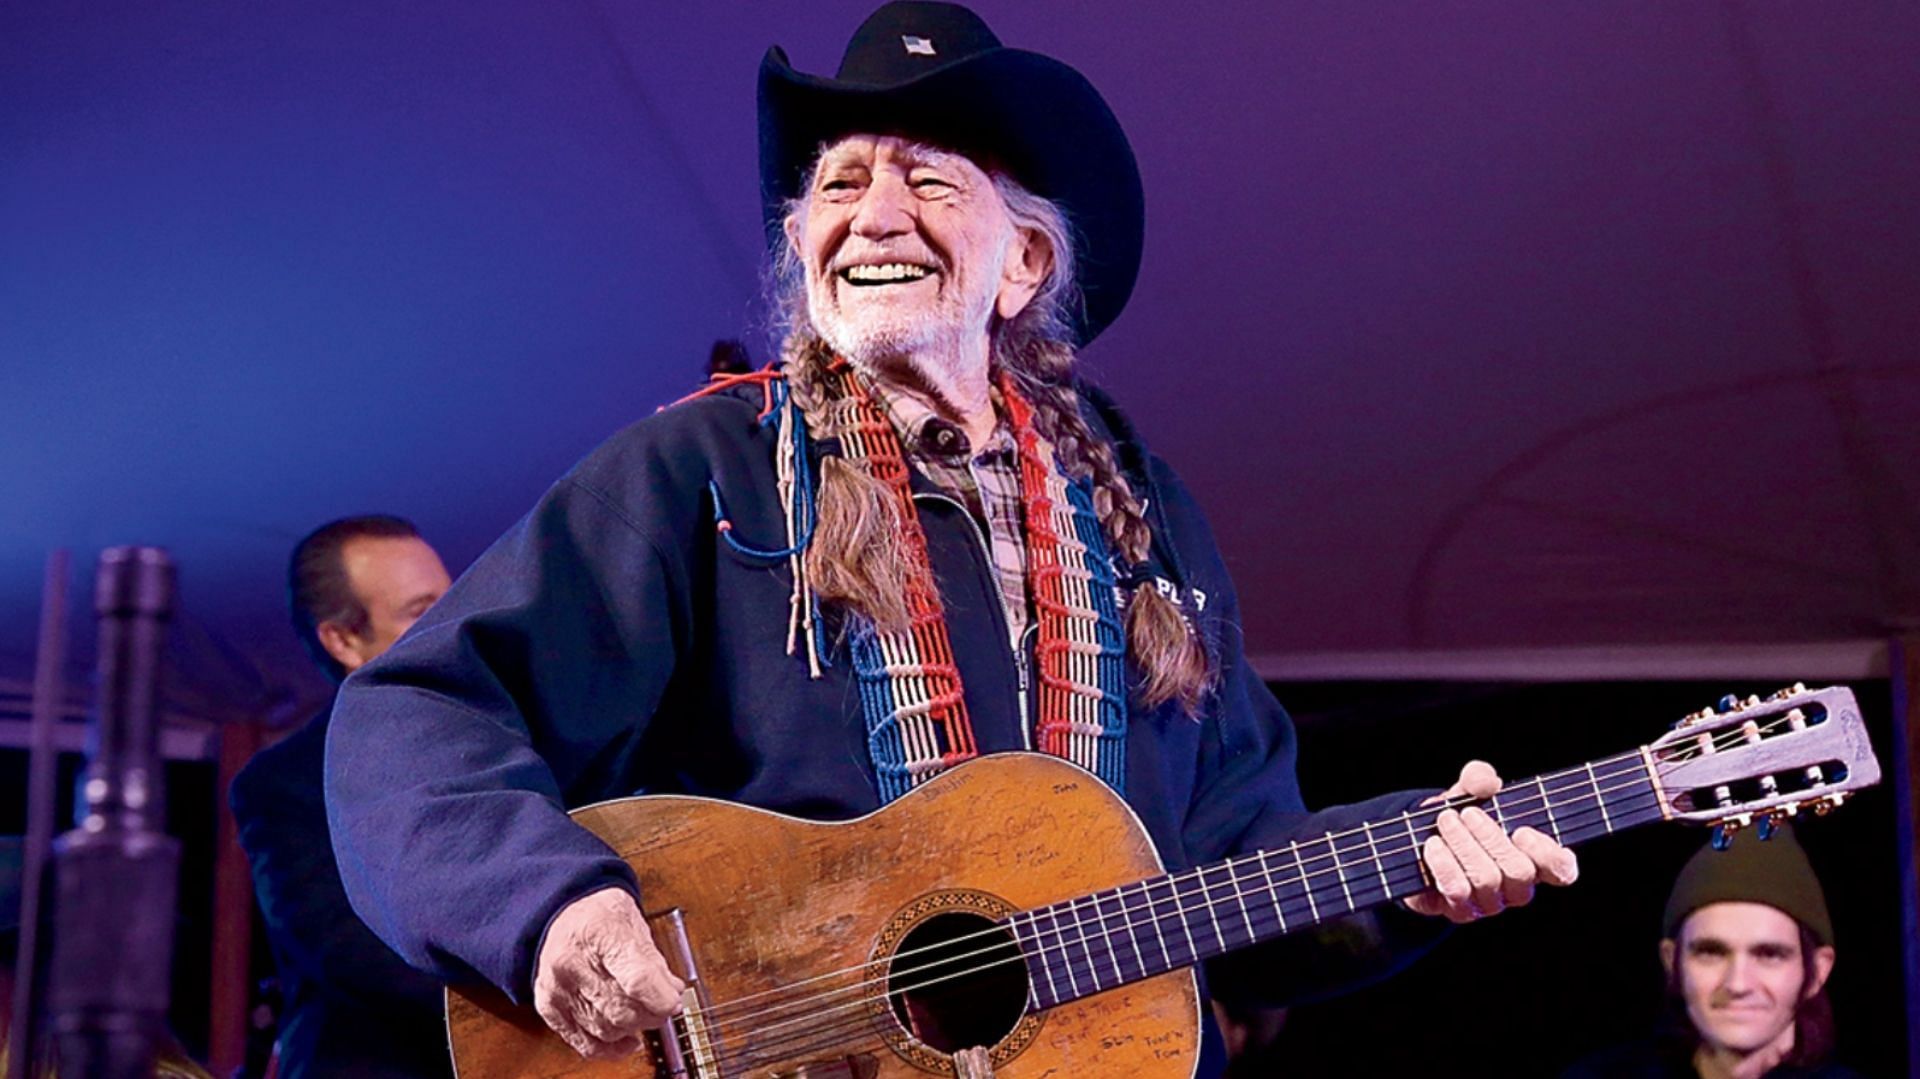 Willie Nelson inhales the love at 90th birthday concert